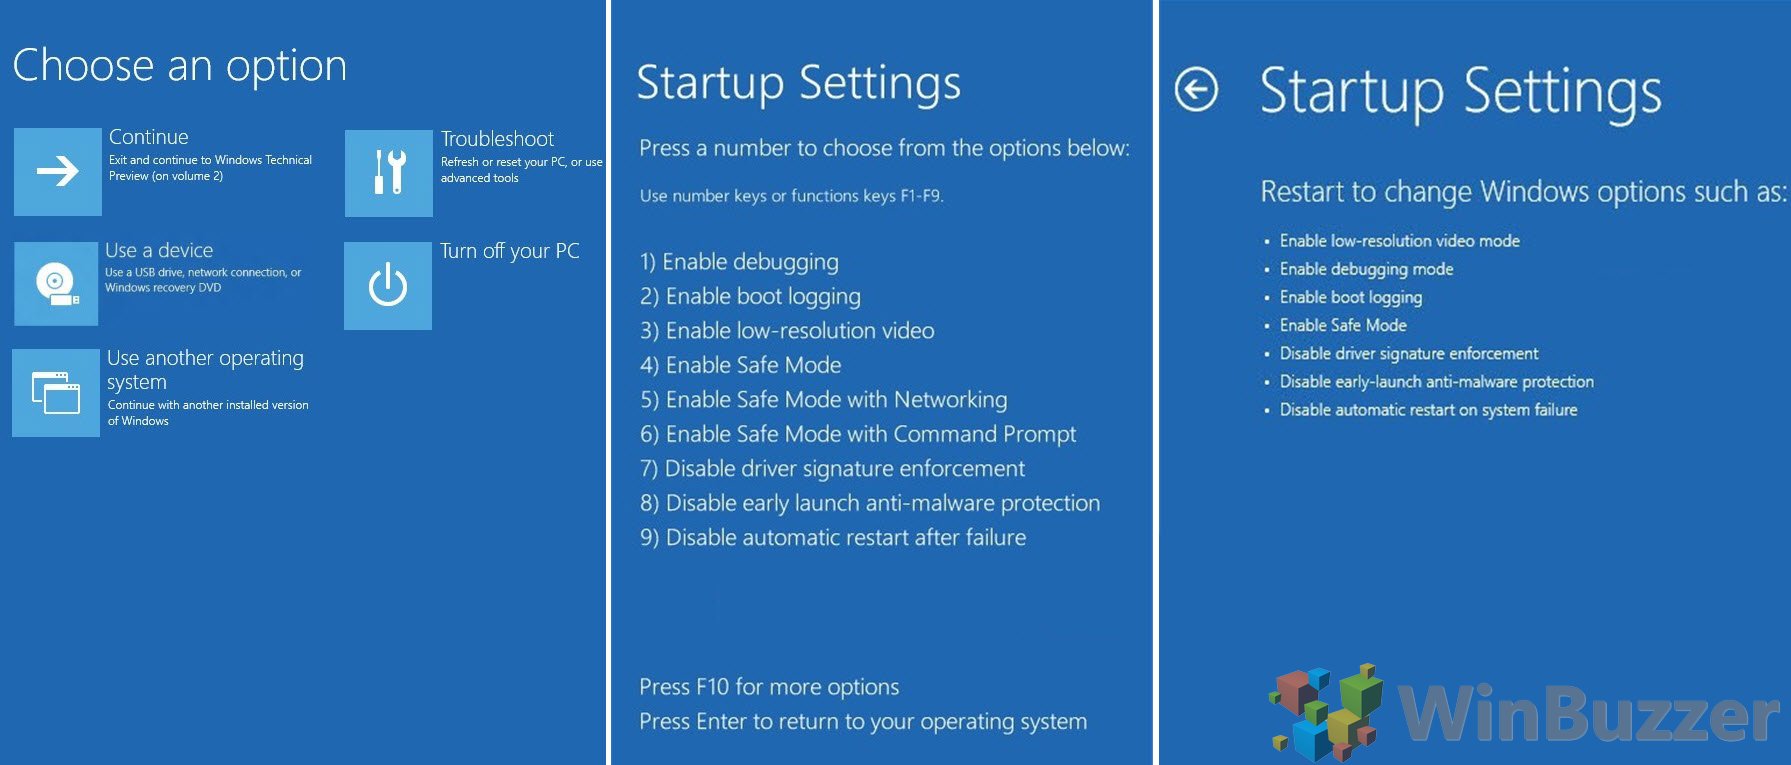 Select Advanced options and then choose Startup Settings.
Press Restart to reboot your laptop.